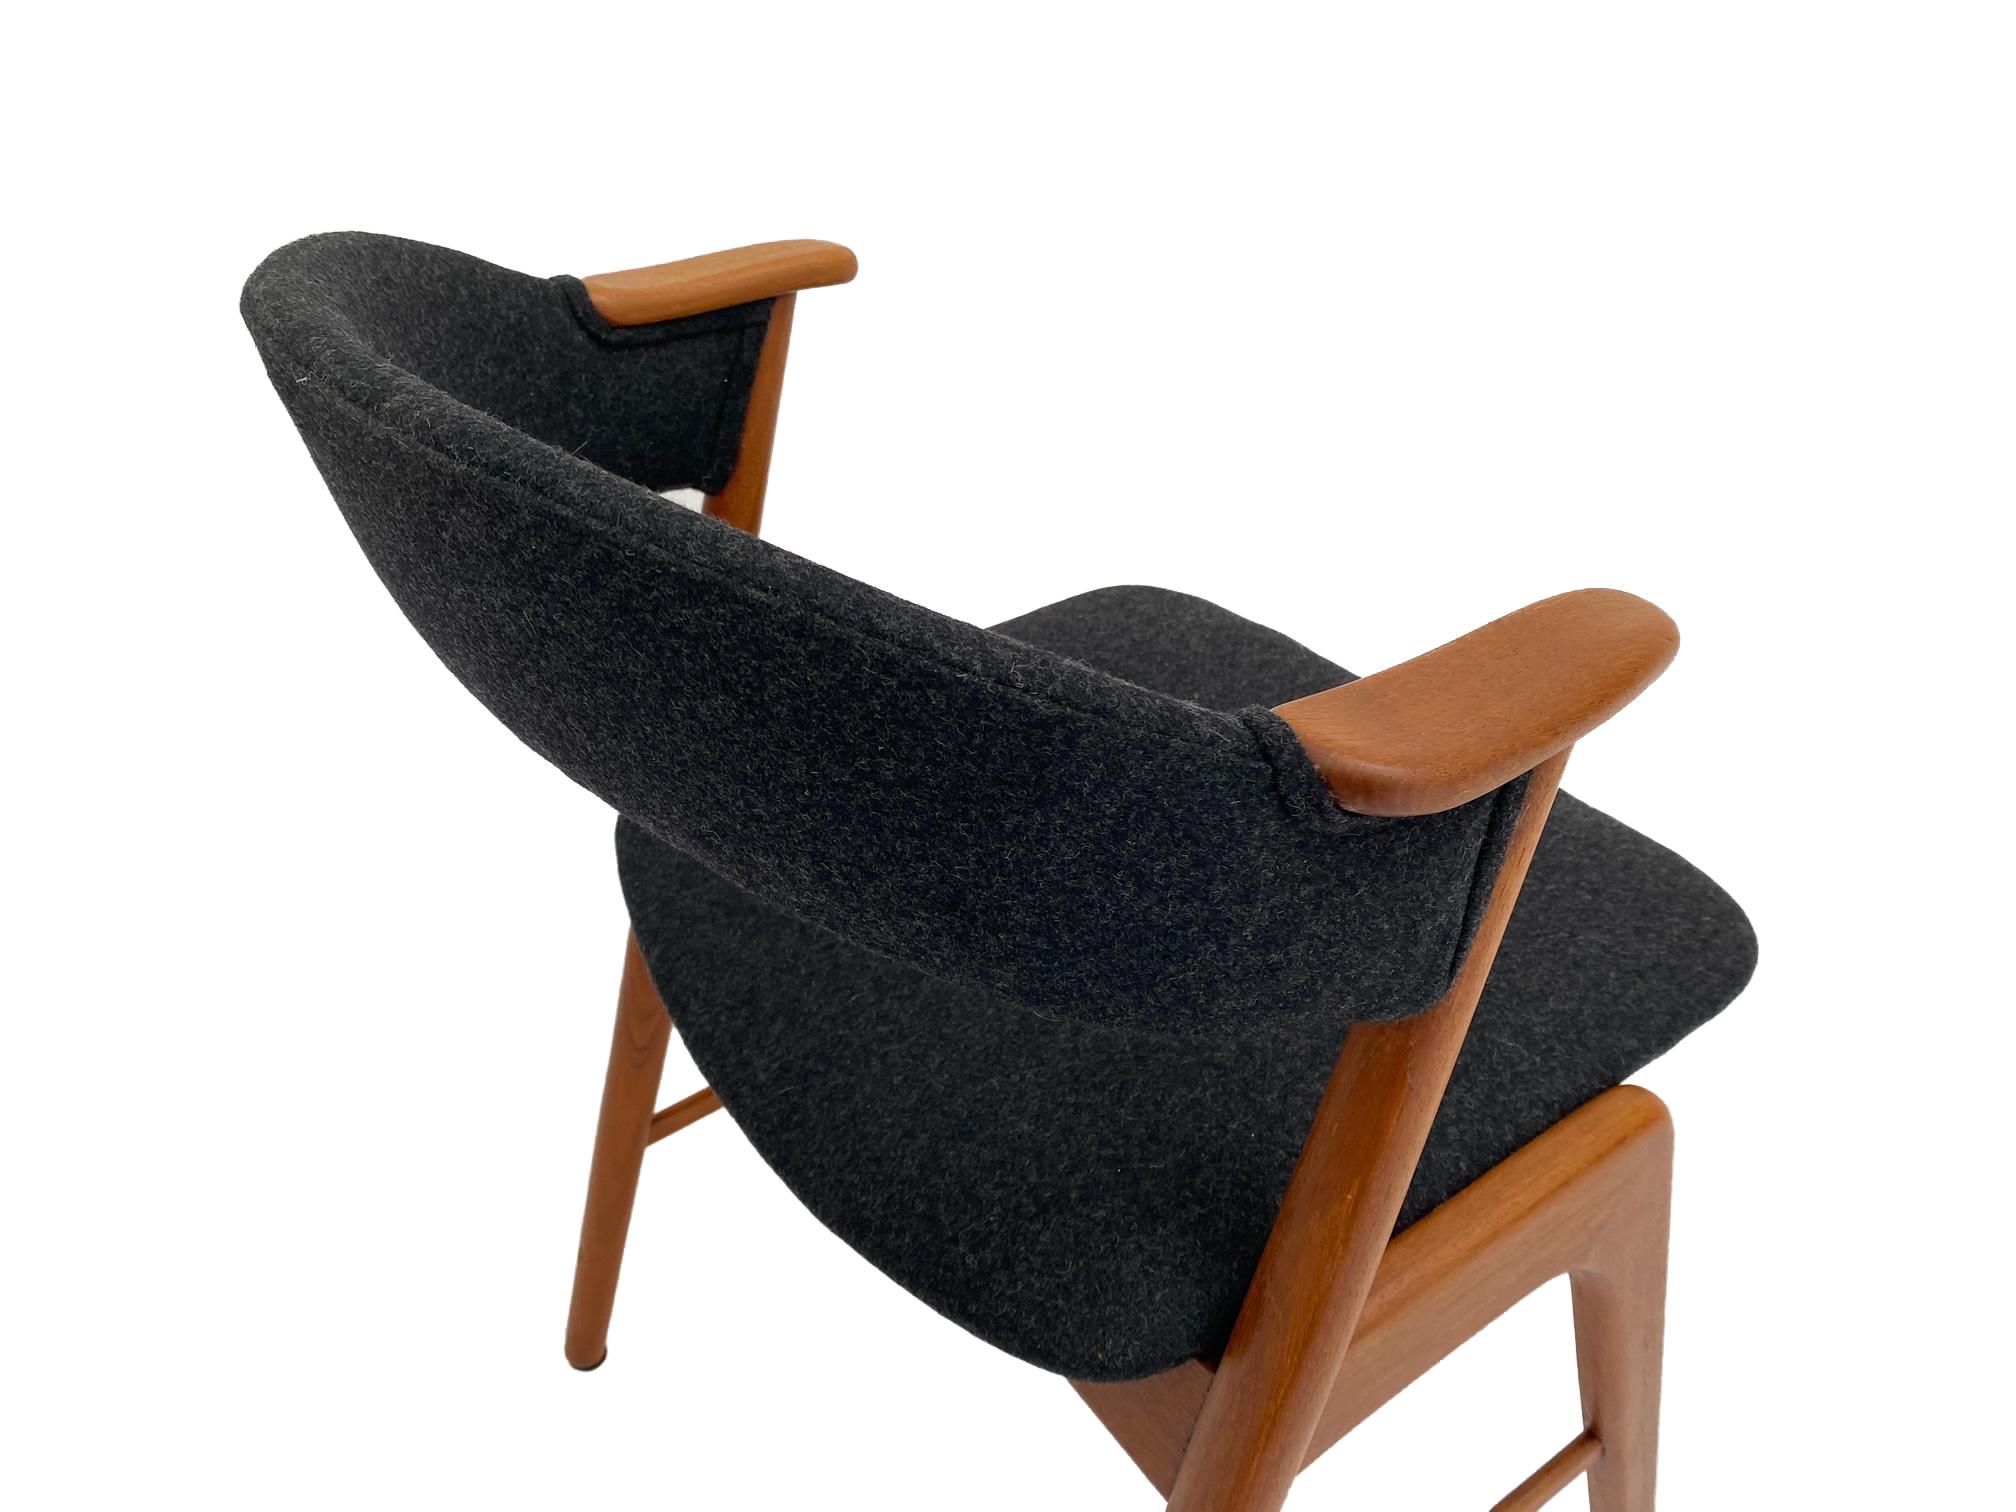 A rare Model 32 charcoal and teak desk armchair designed by Kai Kristiansen for Korup Stolefabrik, this would make a stylish addition to any living or work area.

The Model 32 chair is a testament to Kristiansen's ability to meld style and